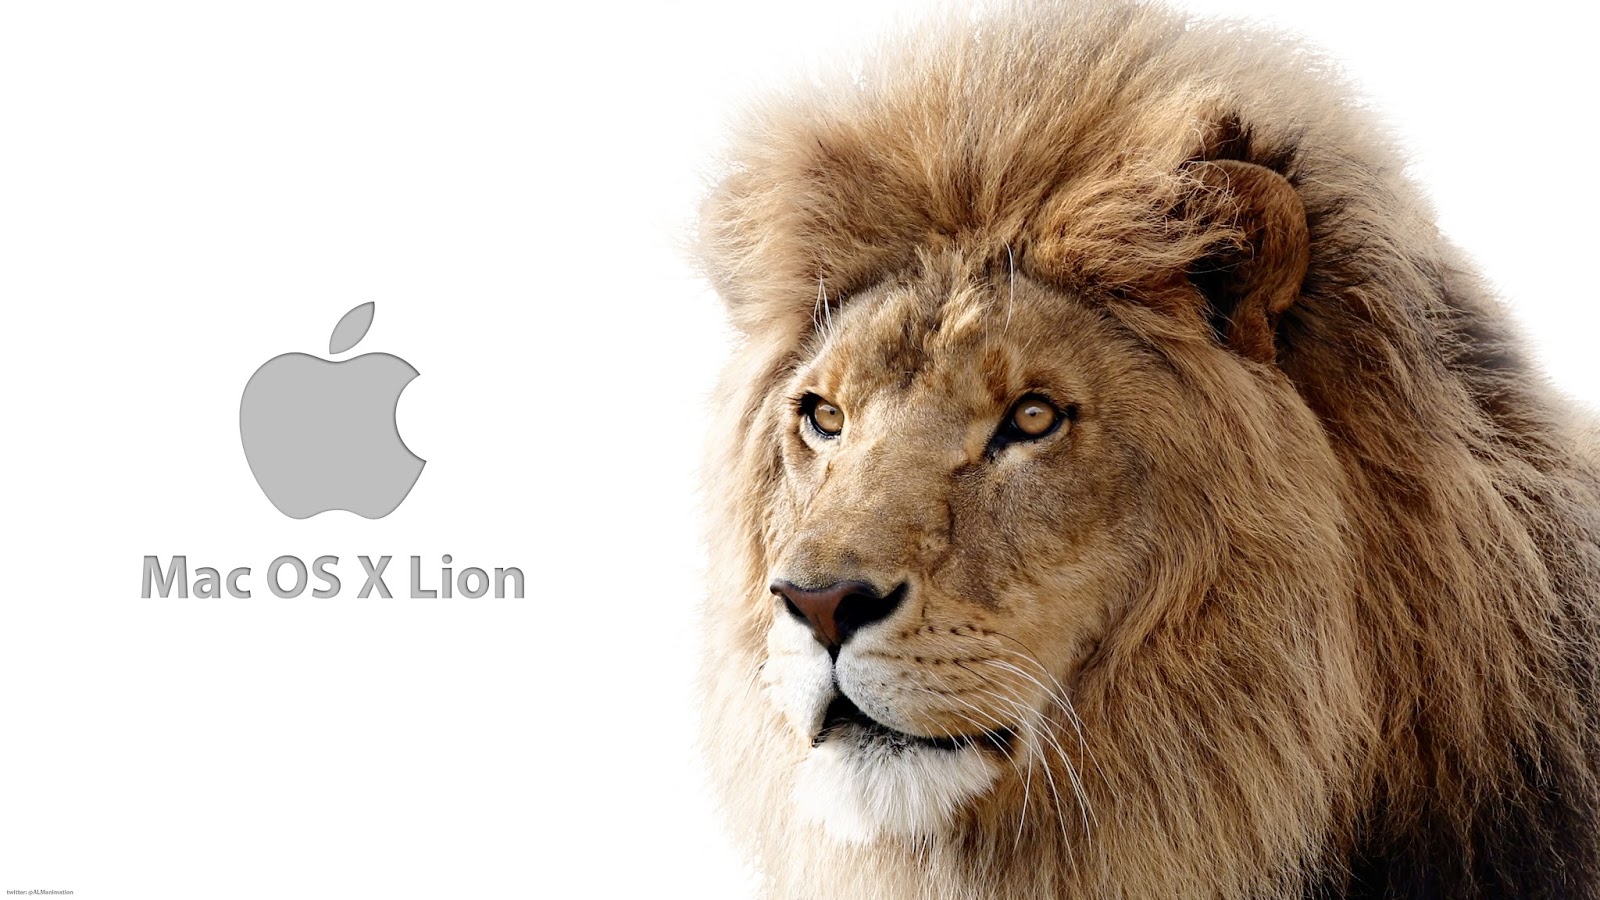 How To Download Os X Lion 10.7.2 For Free